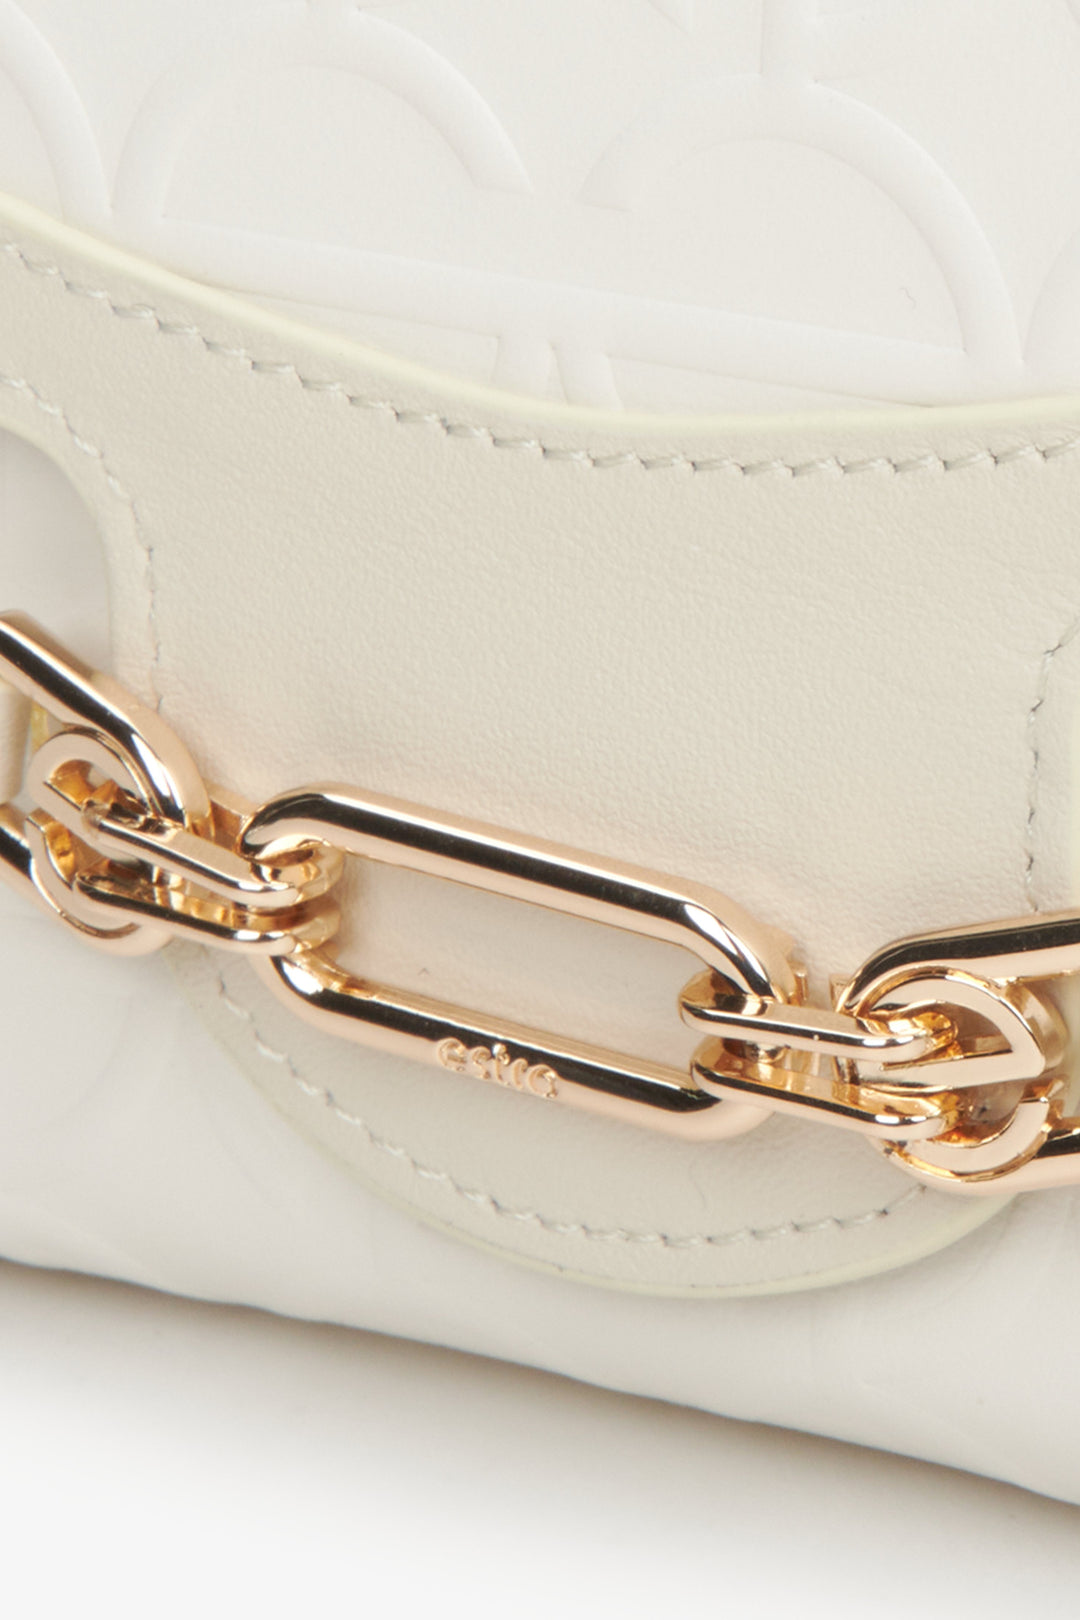 Beige Estro women's compact wallet made of genuine leather - close-up on details.